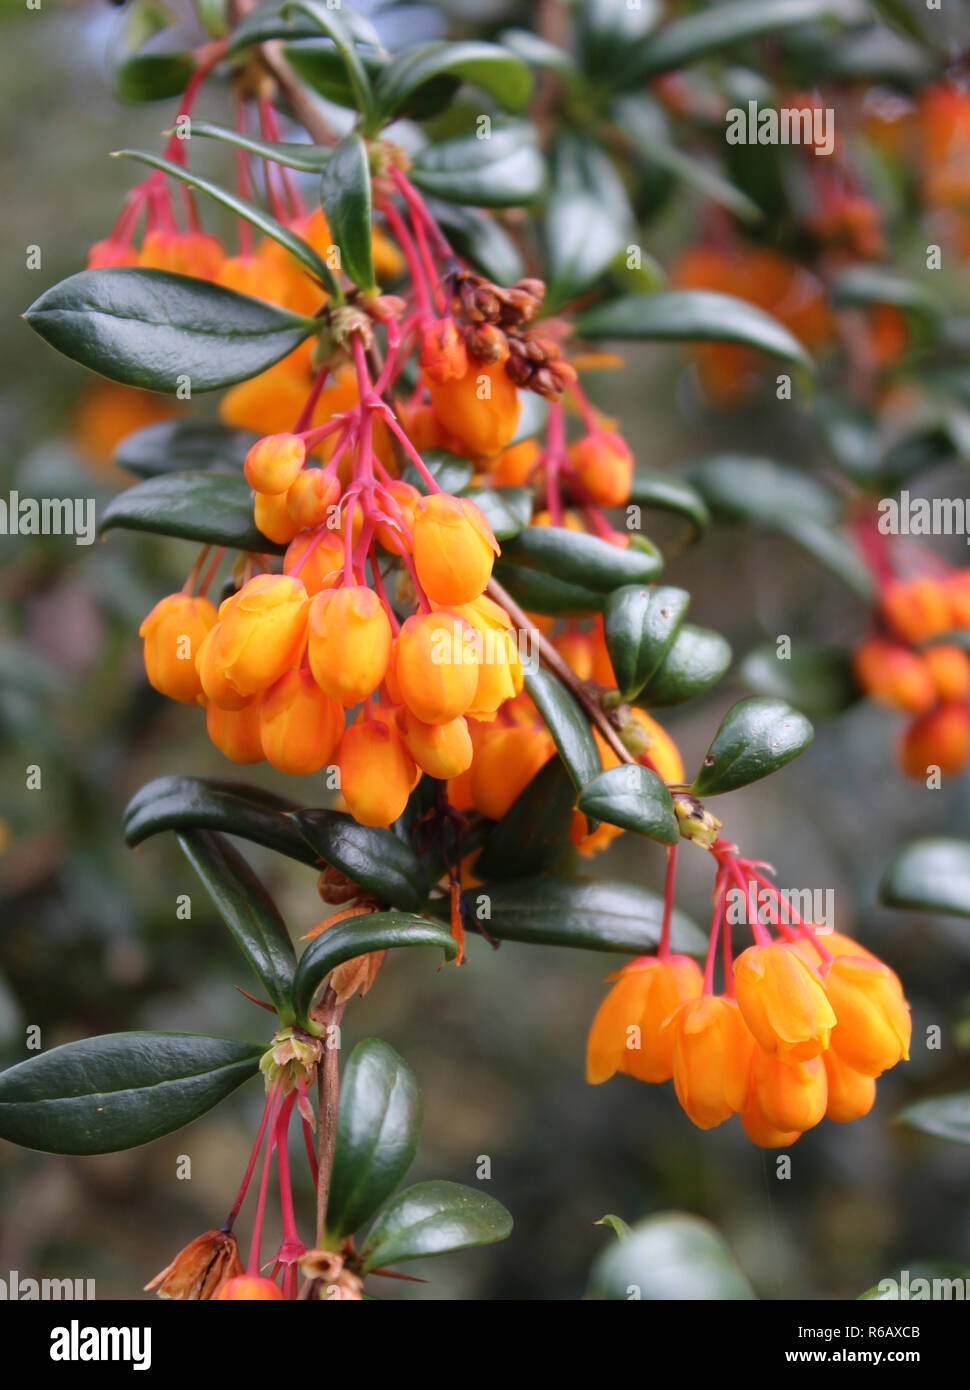 The beautiful bright orange flower buds of Berberis darwinii, in close up in a natural outdoor setting. Darwins barberry. Stock Photo